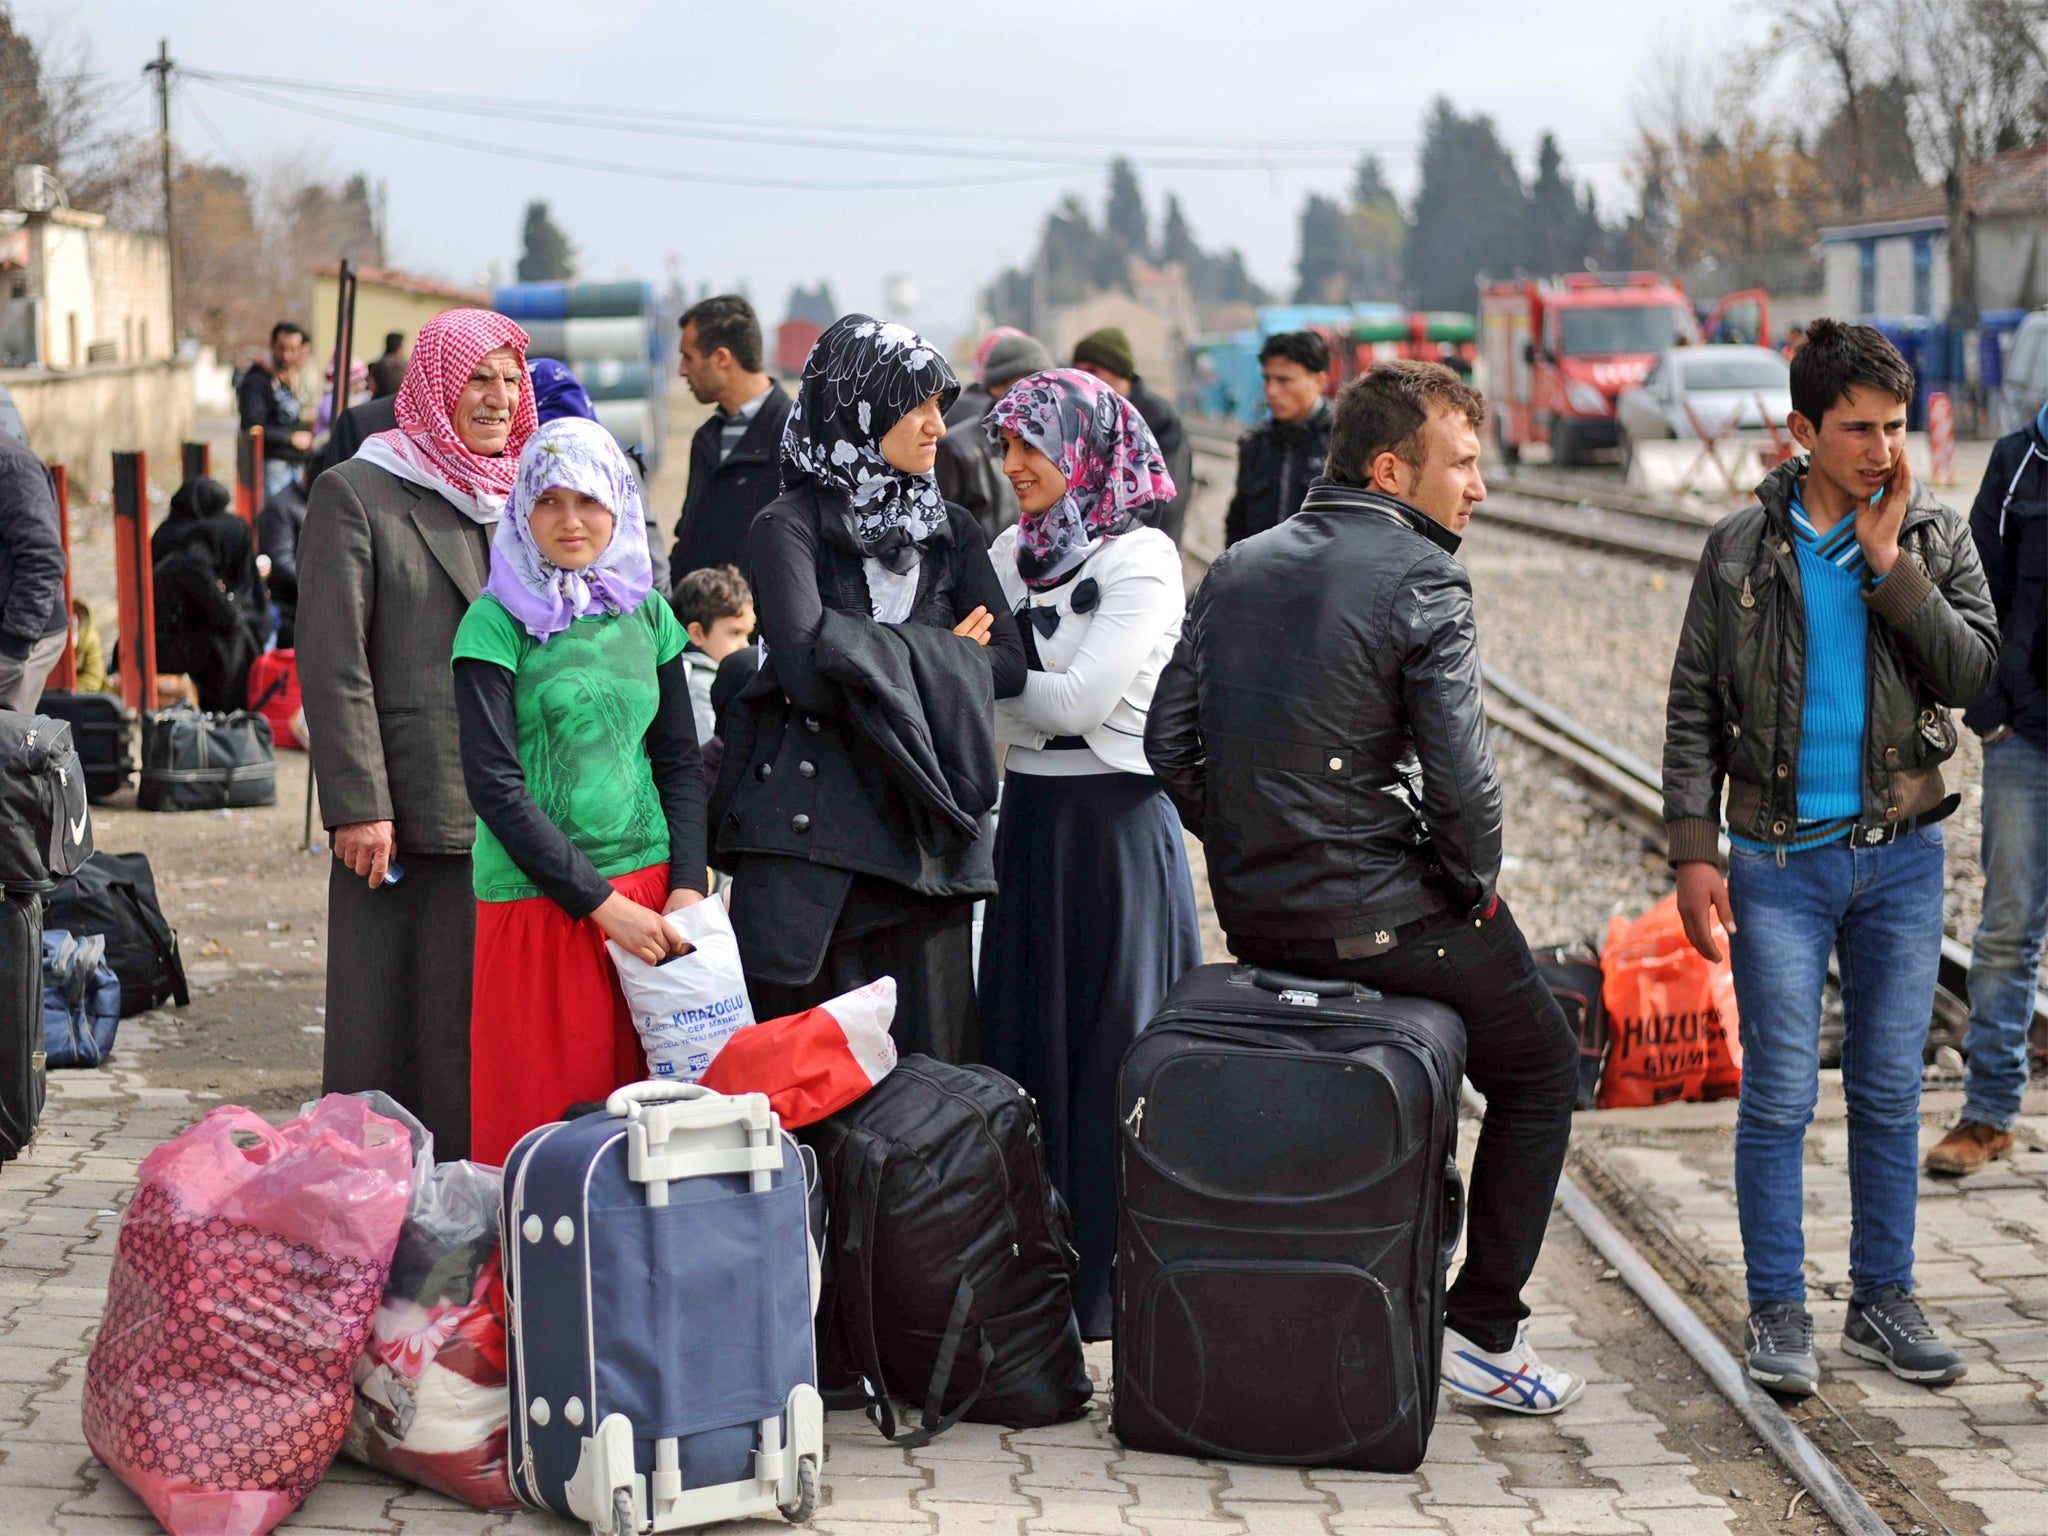 Syrian refugees wait with their belongings next to railway tracks after crossing the border into Turkey